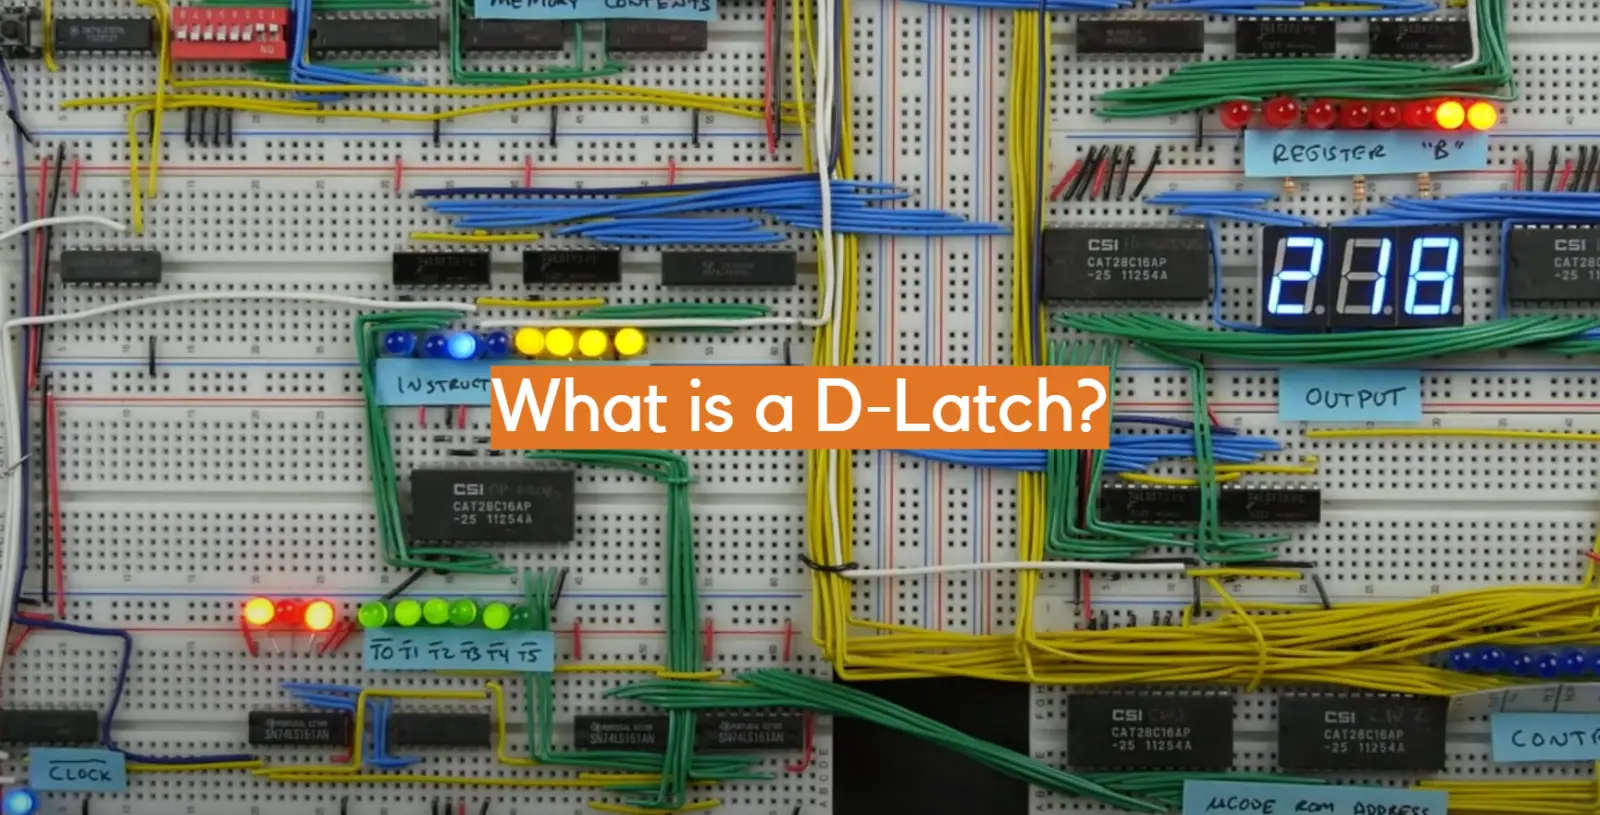 What is a D-Latch?